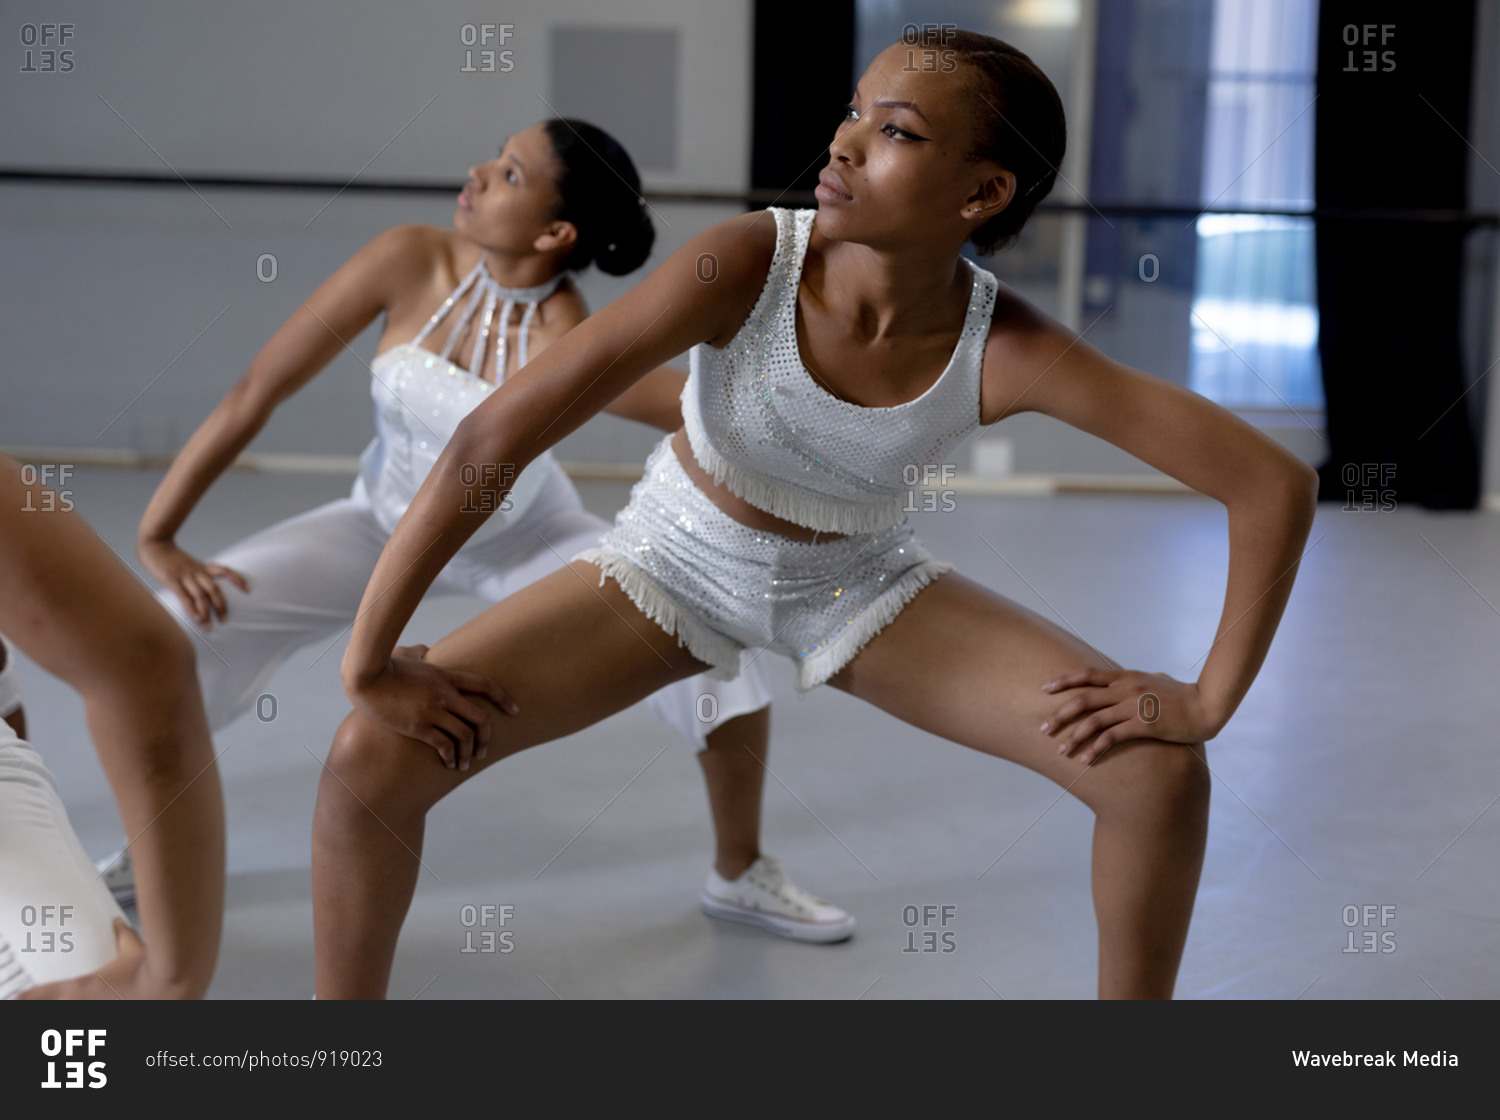 Front view close up of two mixed race fit female modern dancers wearing white outfits practicing a dance routine during a dance class in a bright studio.